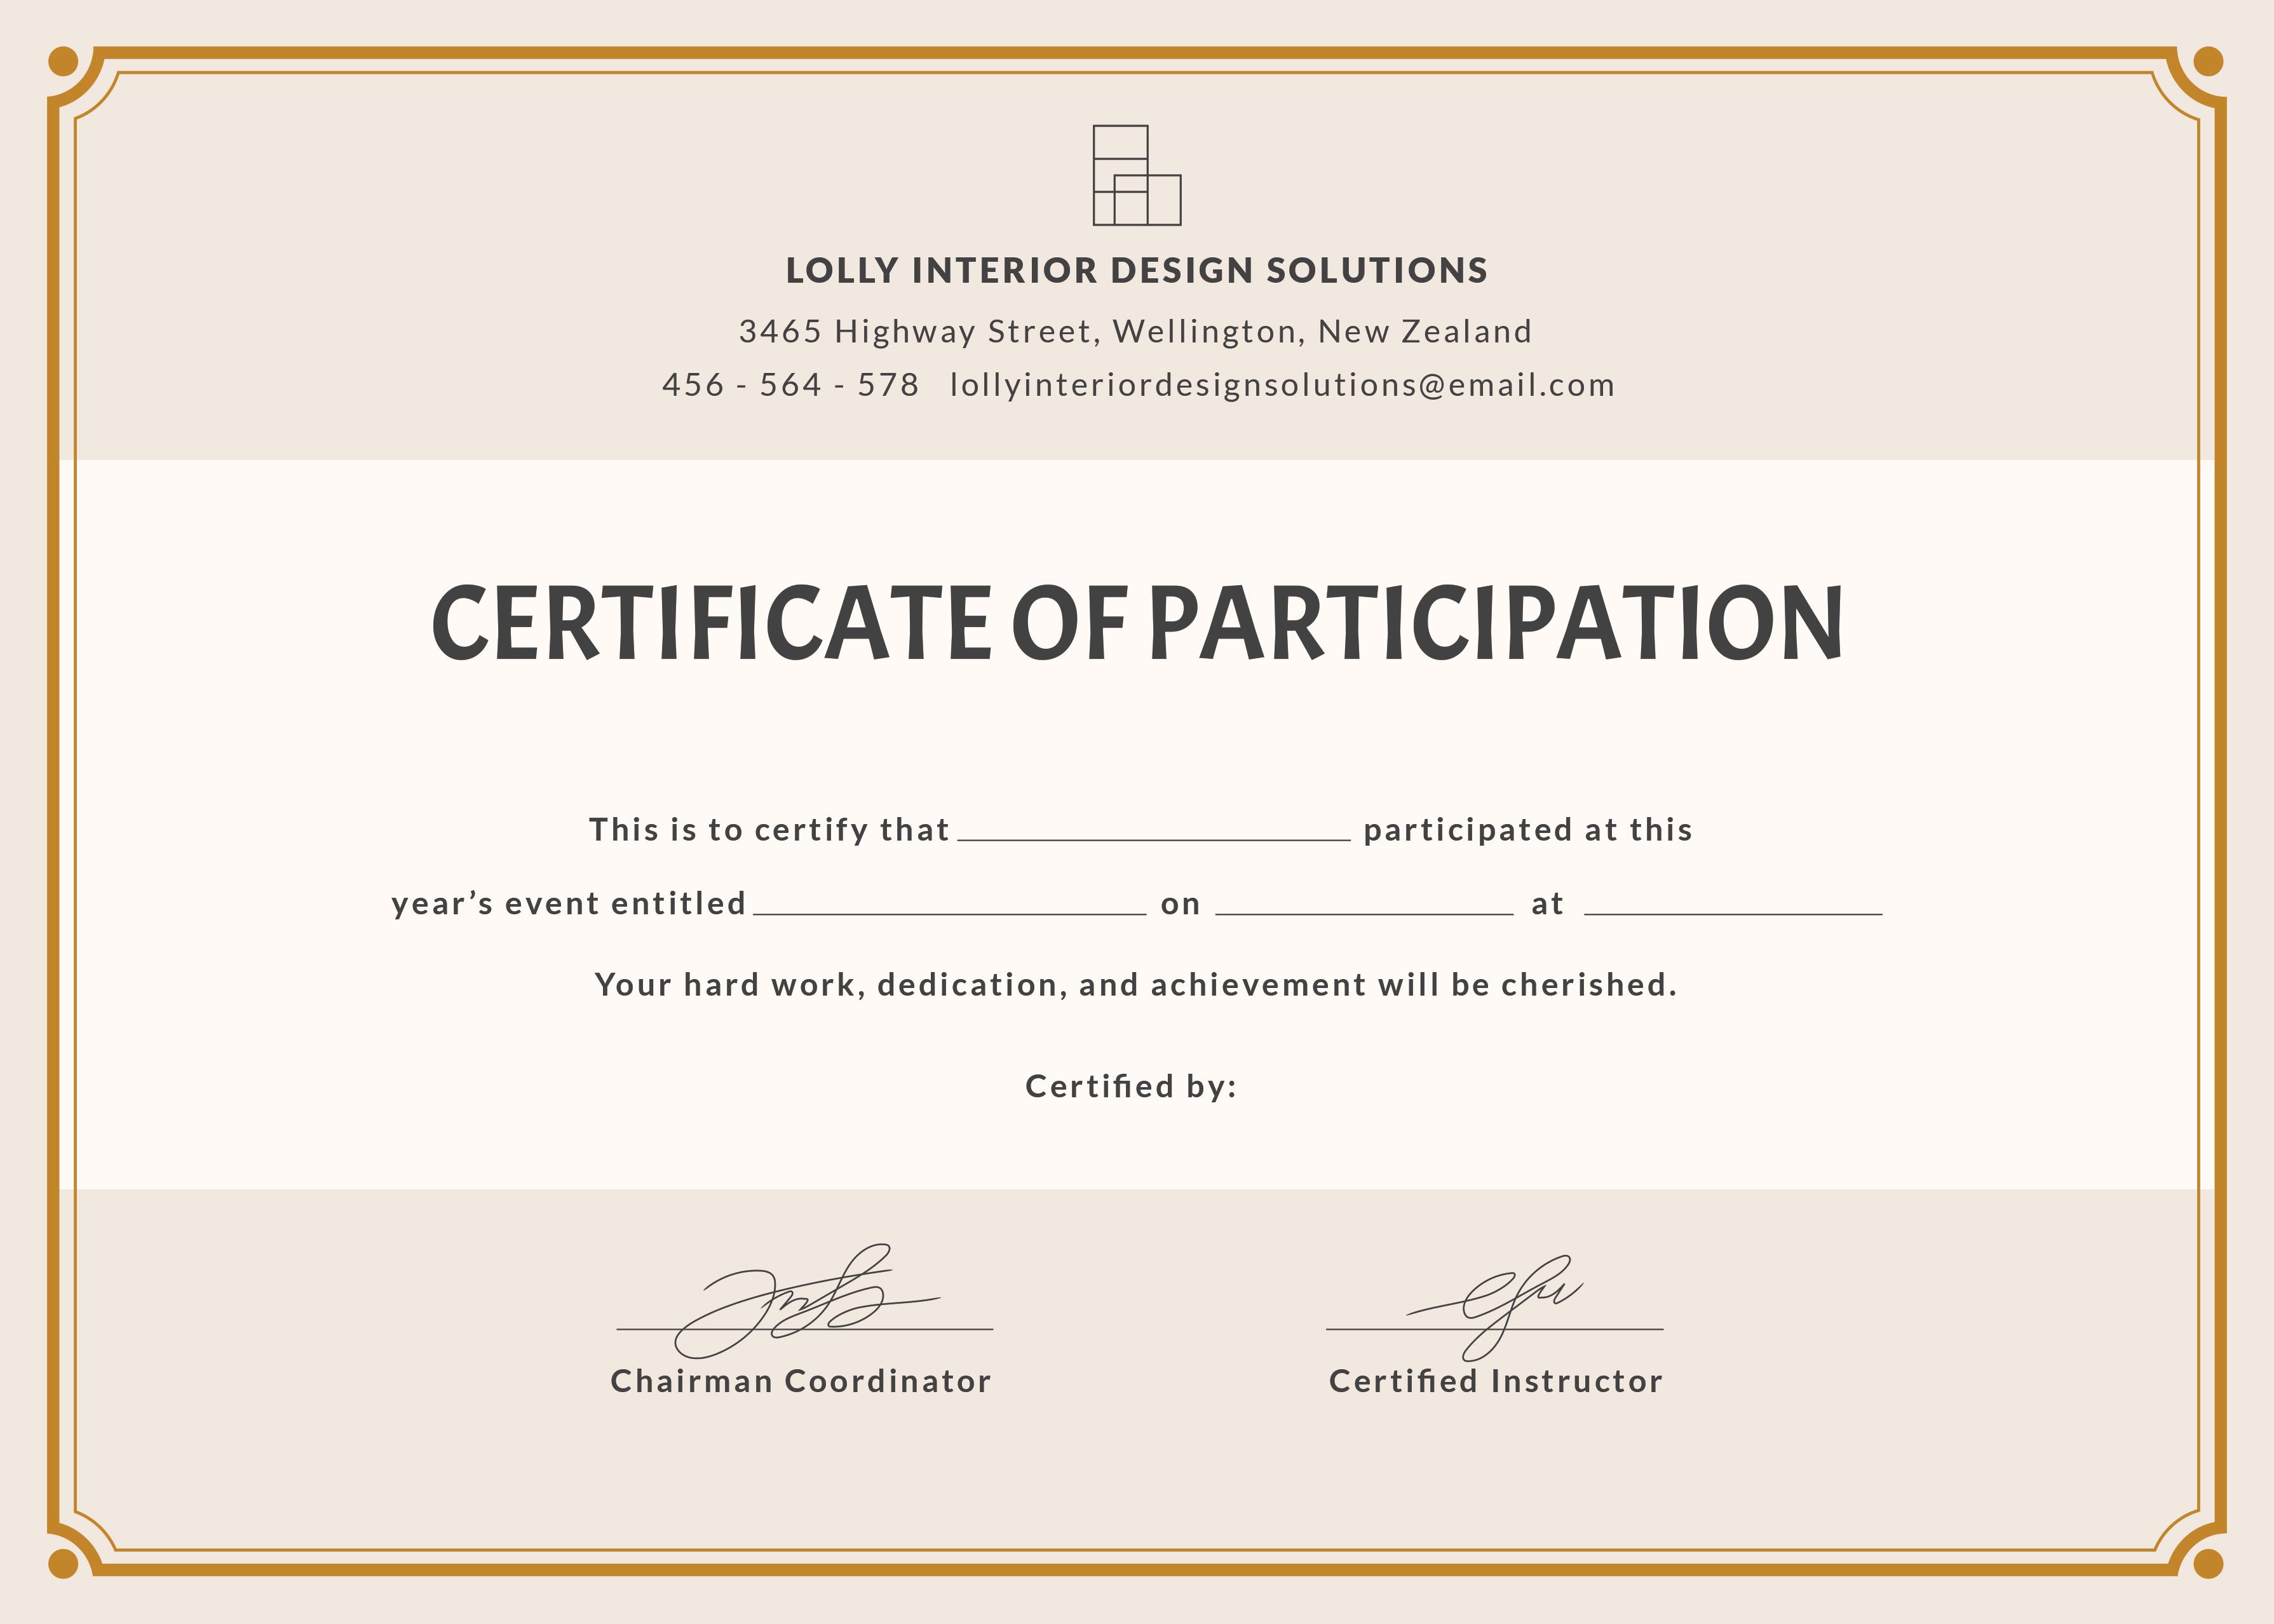 Certificate Of Participation Template Free from certificateof.com